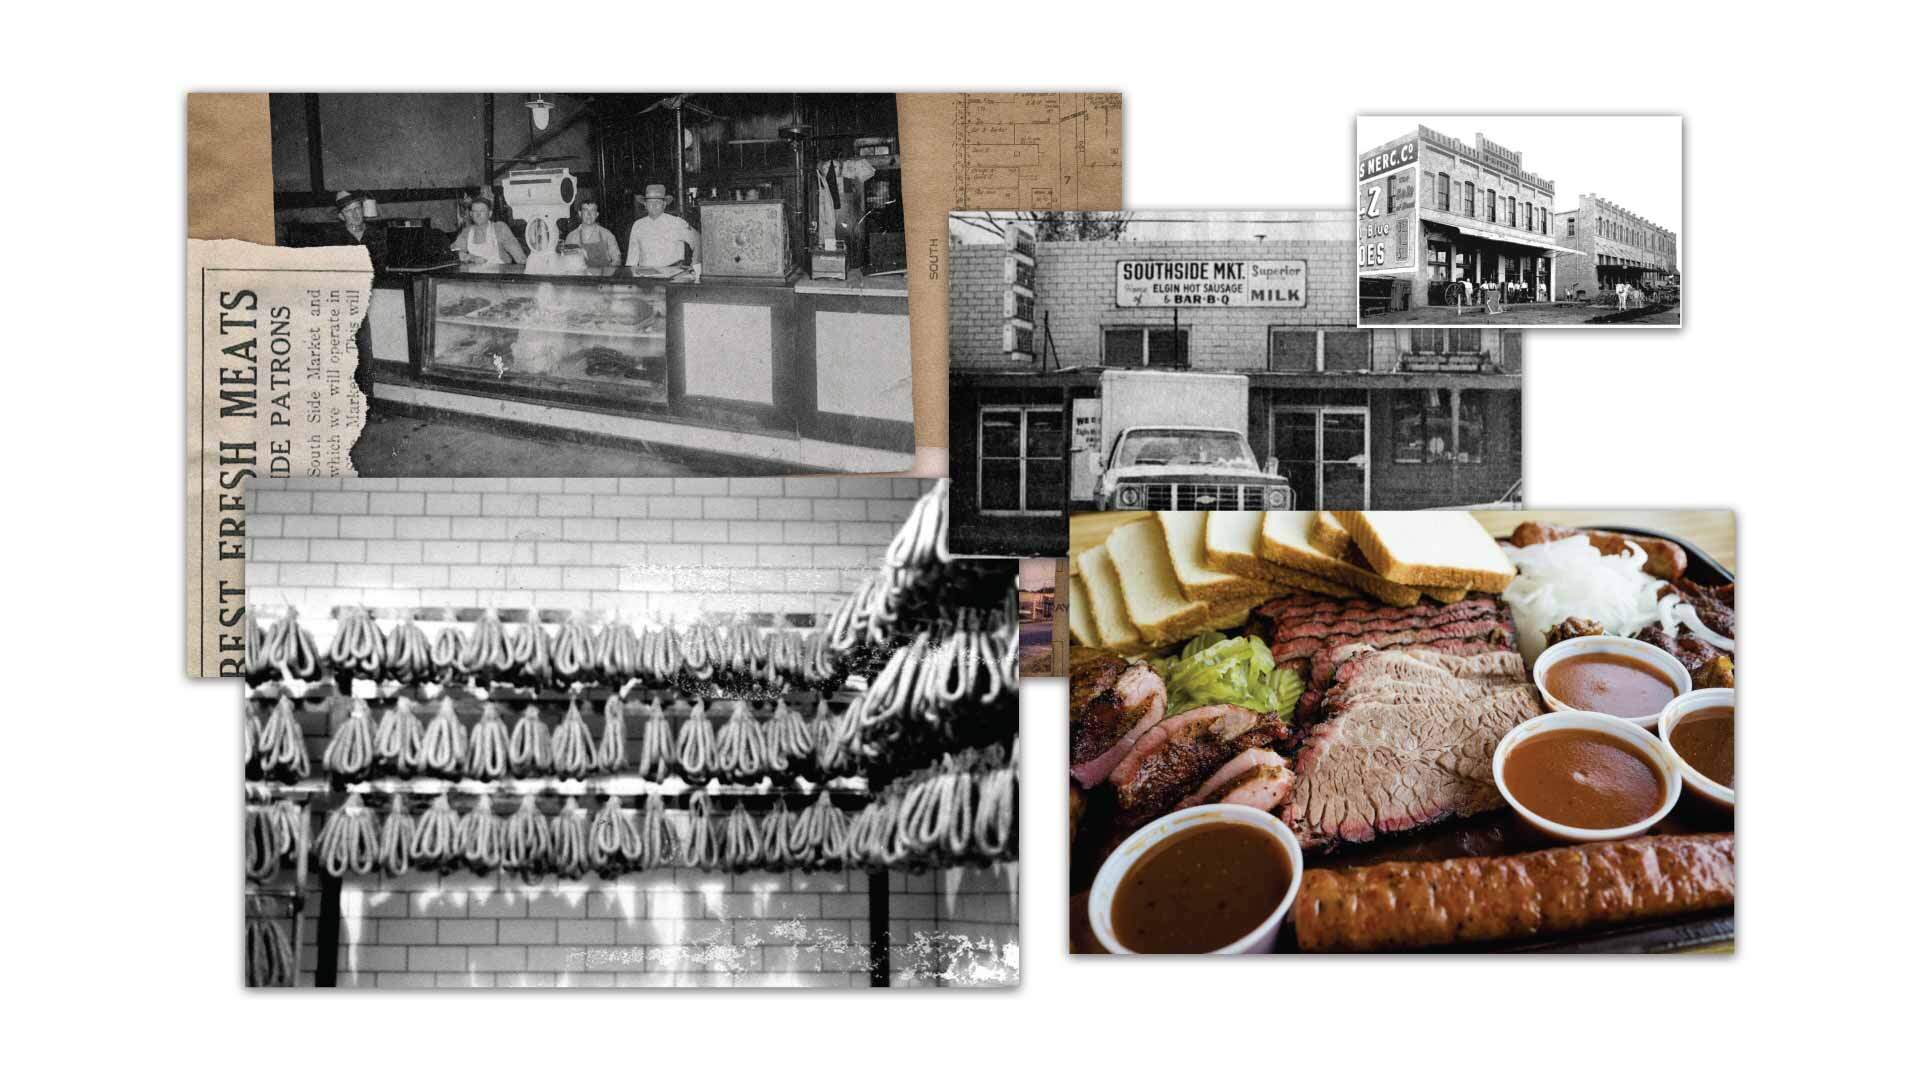 Southside Market & Barbeque brand refresh mood board depicting vintage photographs from Southside's long history